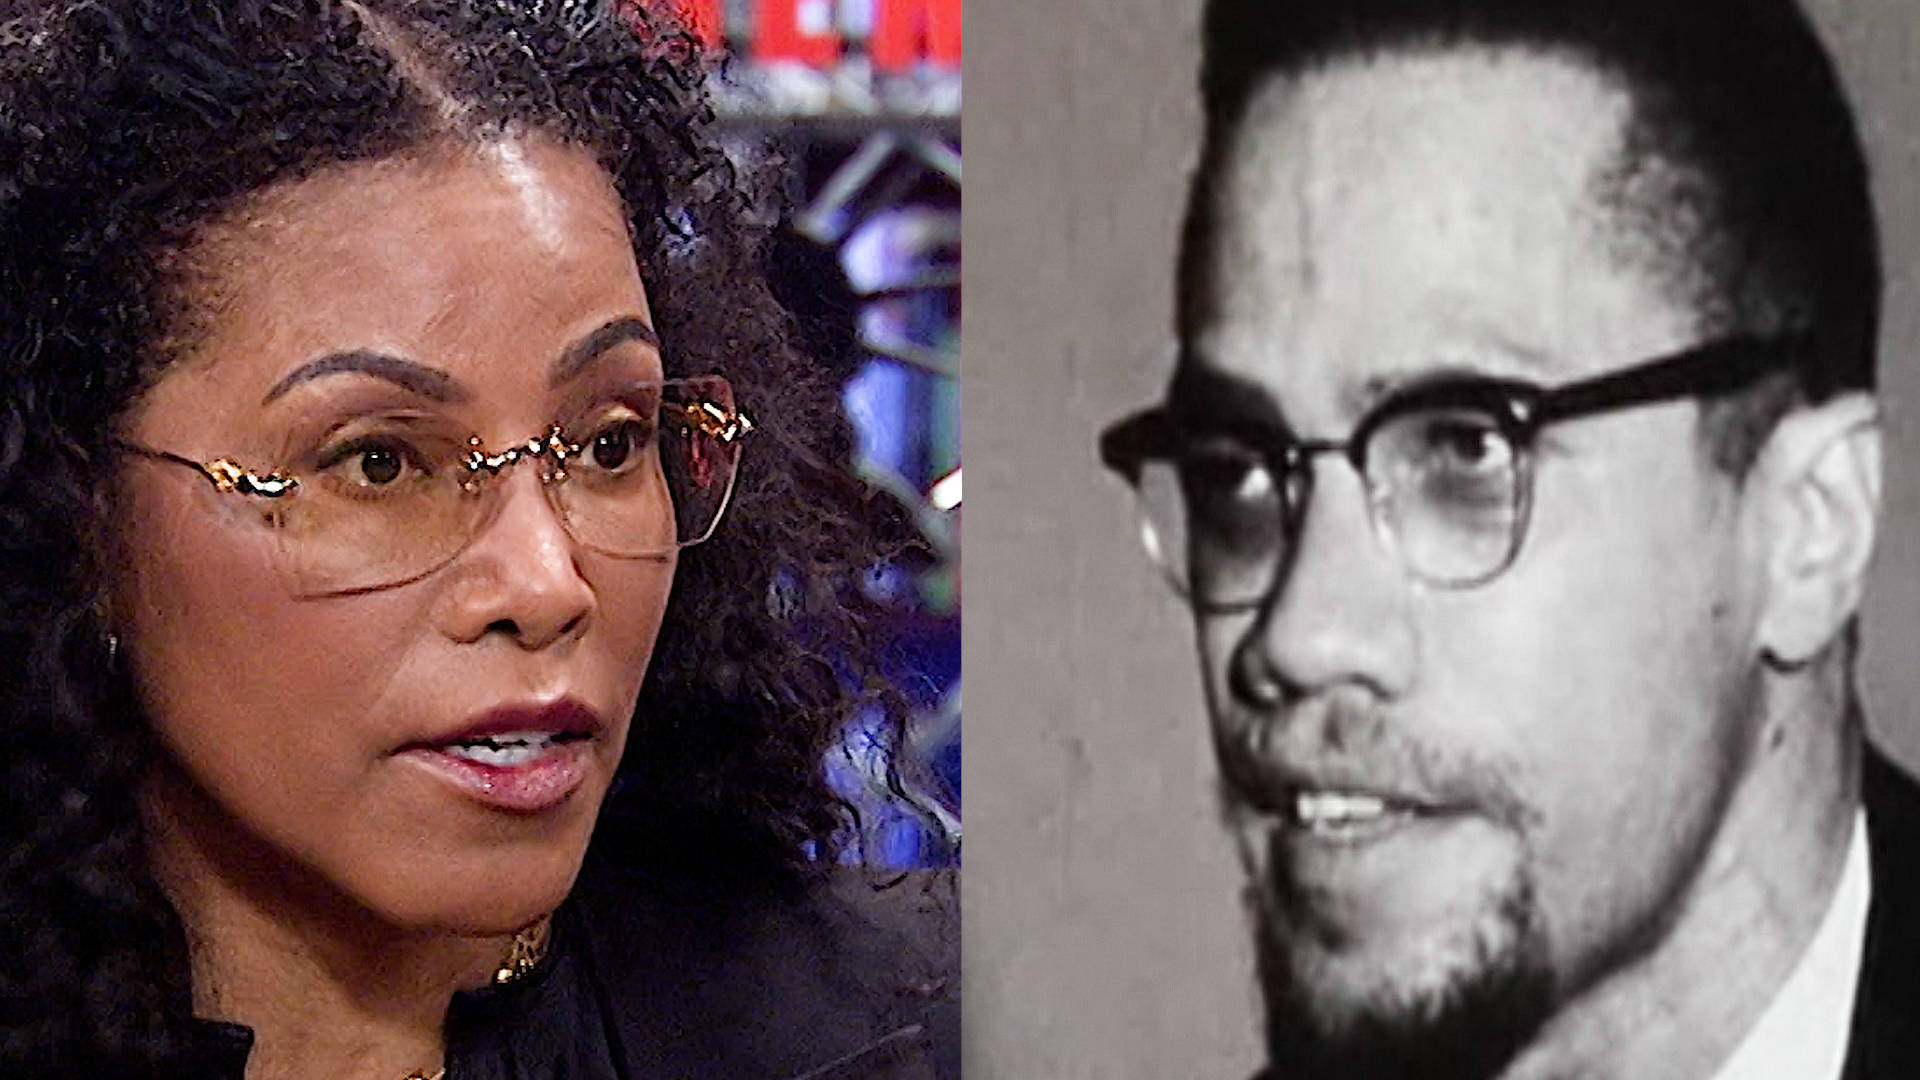 Malcolm X S Daughter Ilyasah Shabazz On Her Father S Legacy The New Series Who Killed Malcolm X Democracy Now Yes, he had six daughters with his wife, betty shabazz: malcolm x s daughter ilyasah shabazz on